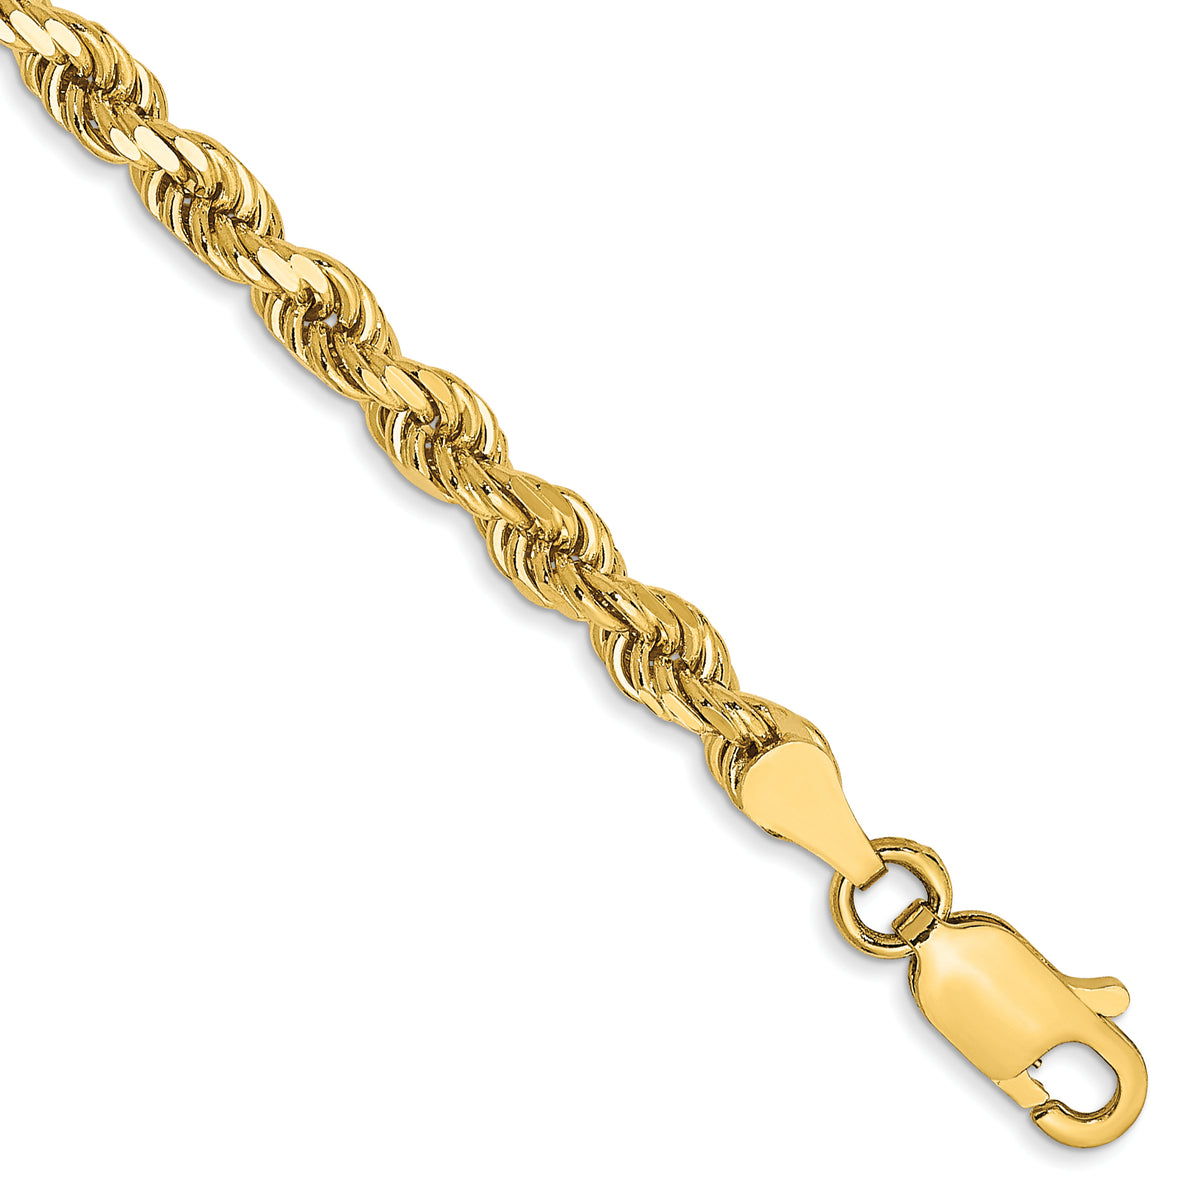 14K 9 inch 3.5mm Diamond-cut Rope with Lobster Clasp Chain